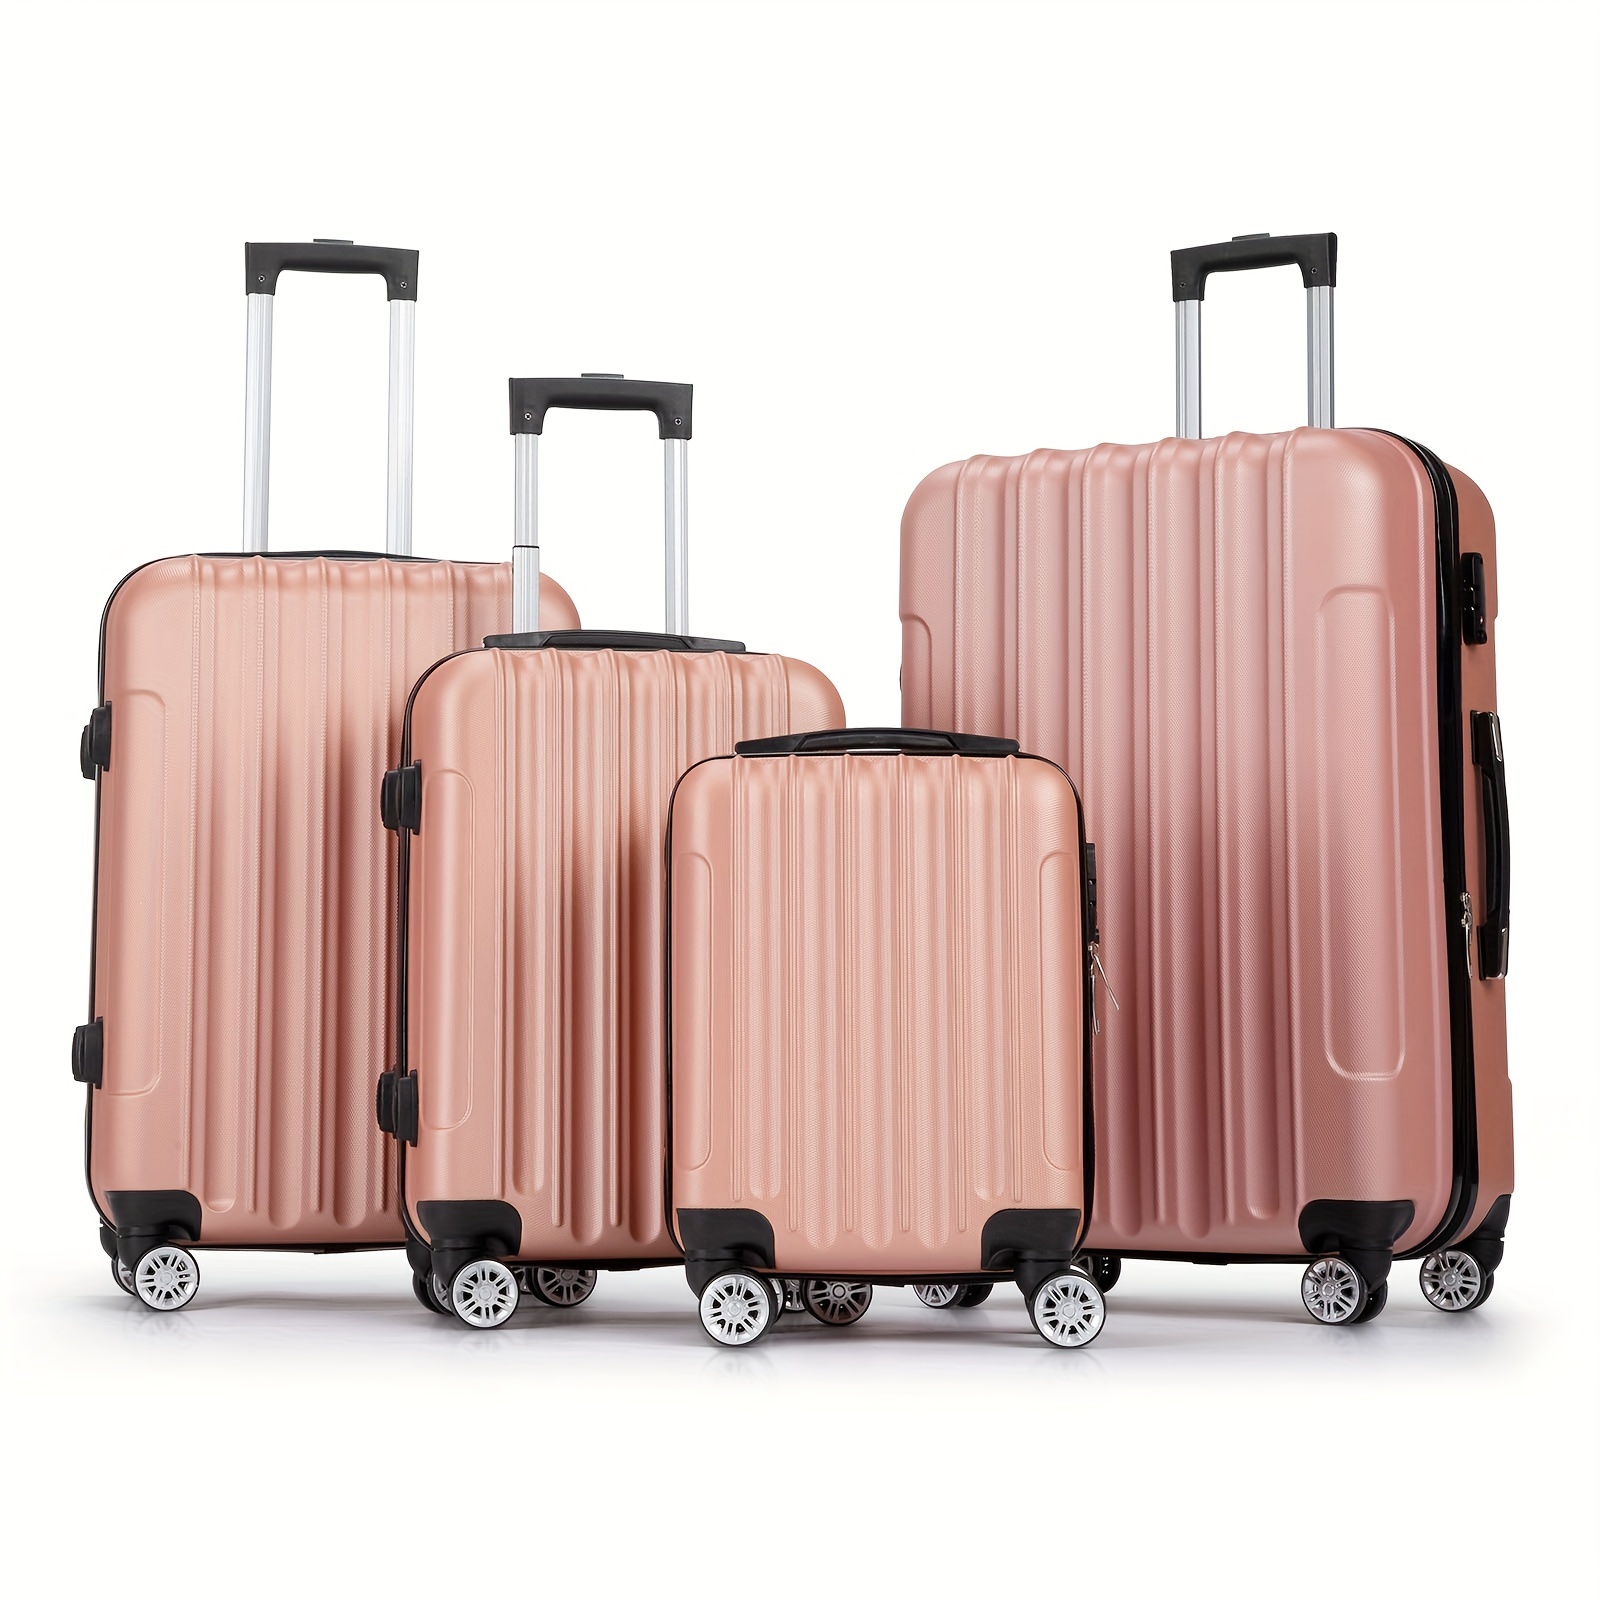 

4-in-1 Portable Abs Trolley Case 16 "/ 20"/ 24"/ 28" Rose Gold Color